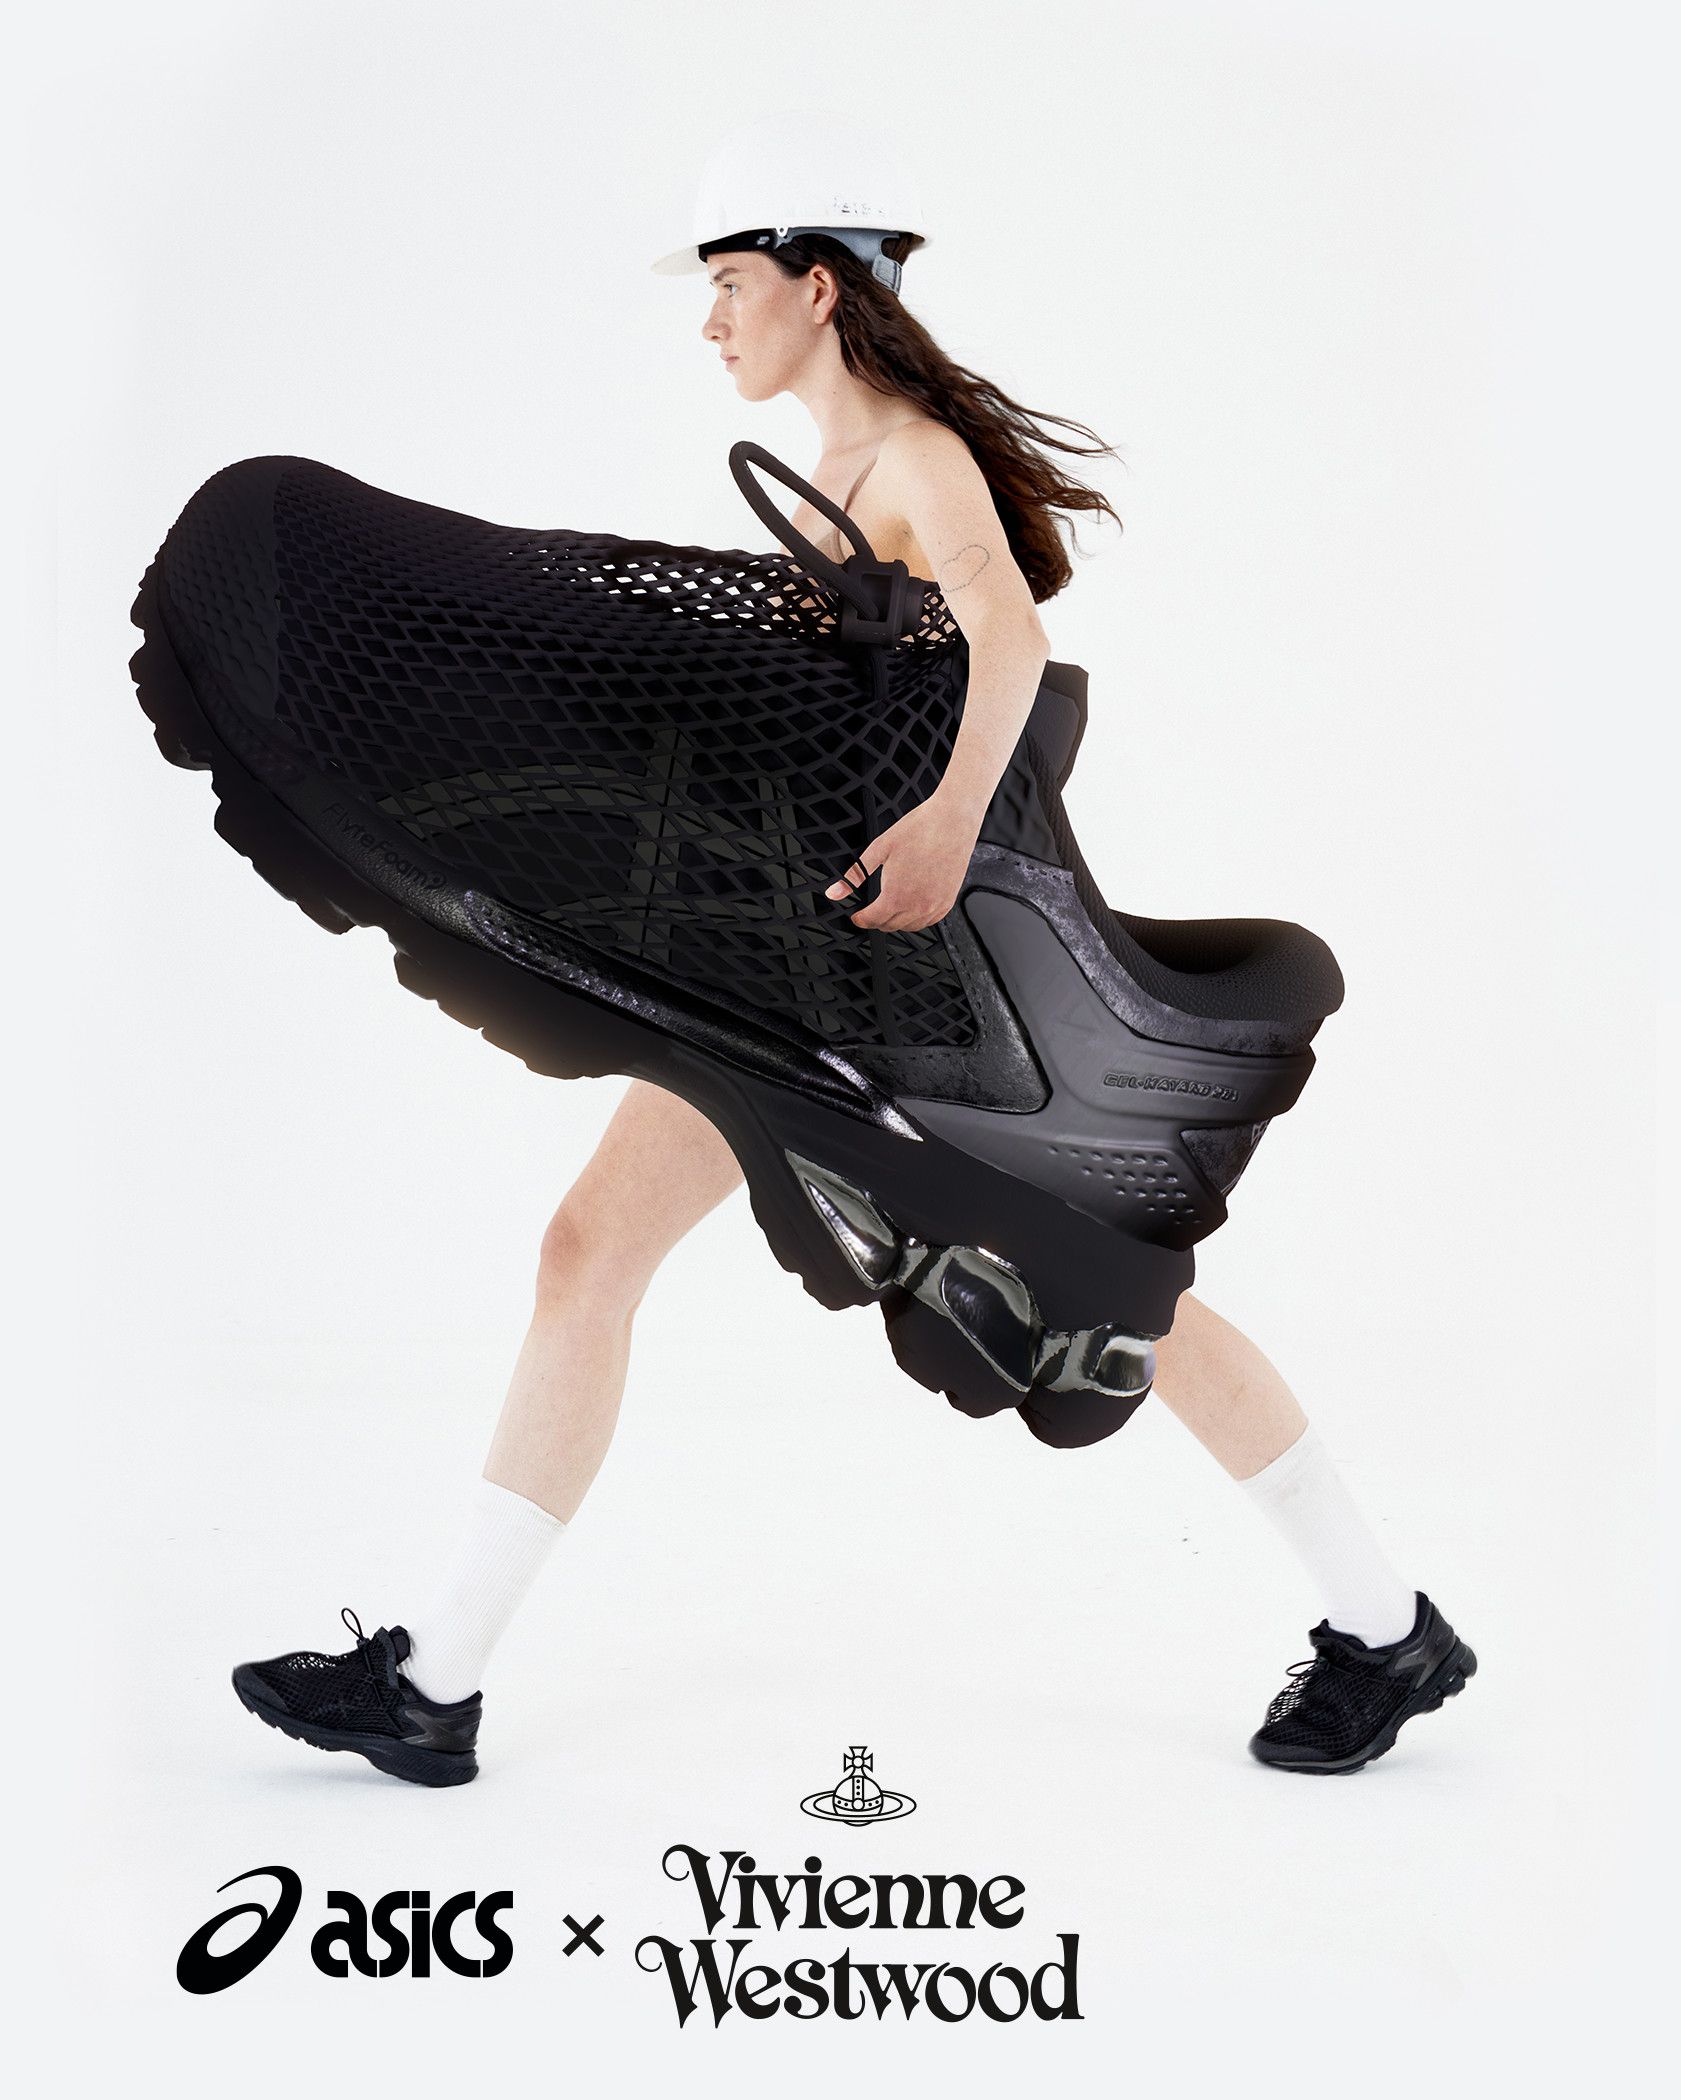 Asics x Vivienne Westwood FW21 - Paolo Colaiocco styled by Sabina Schreder